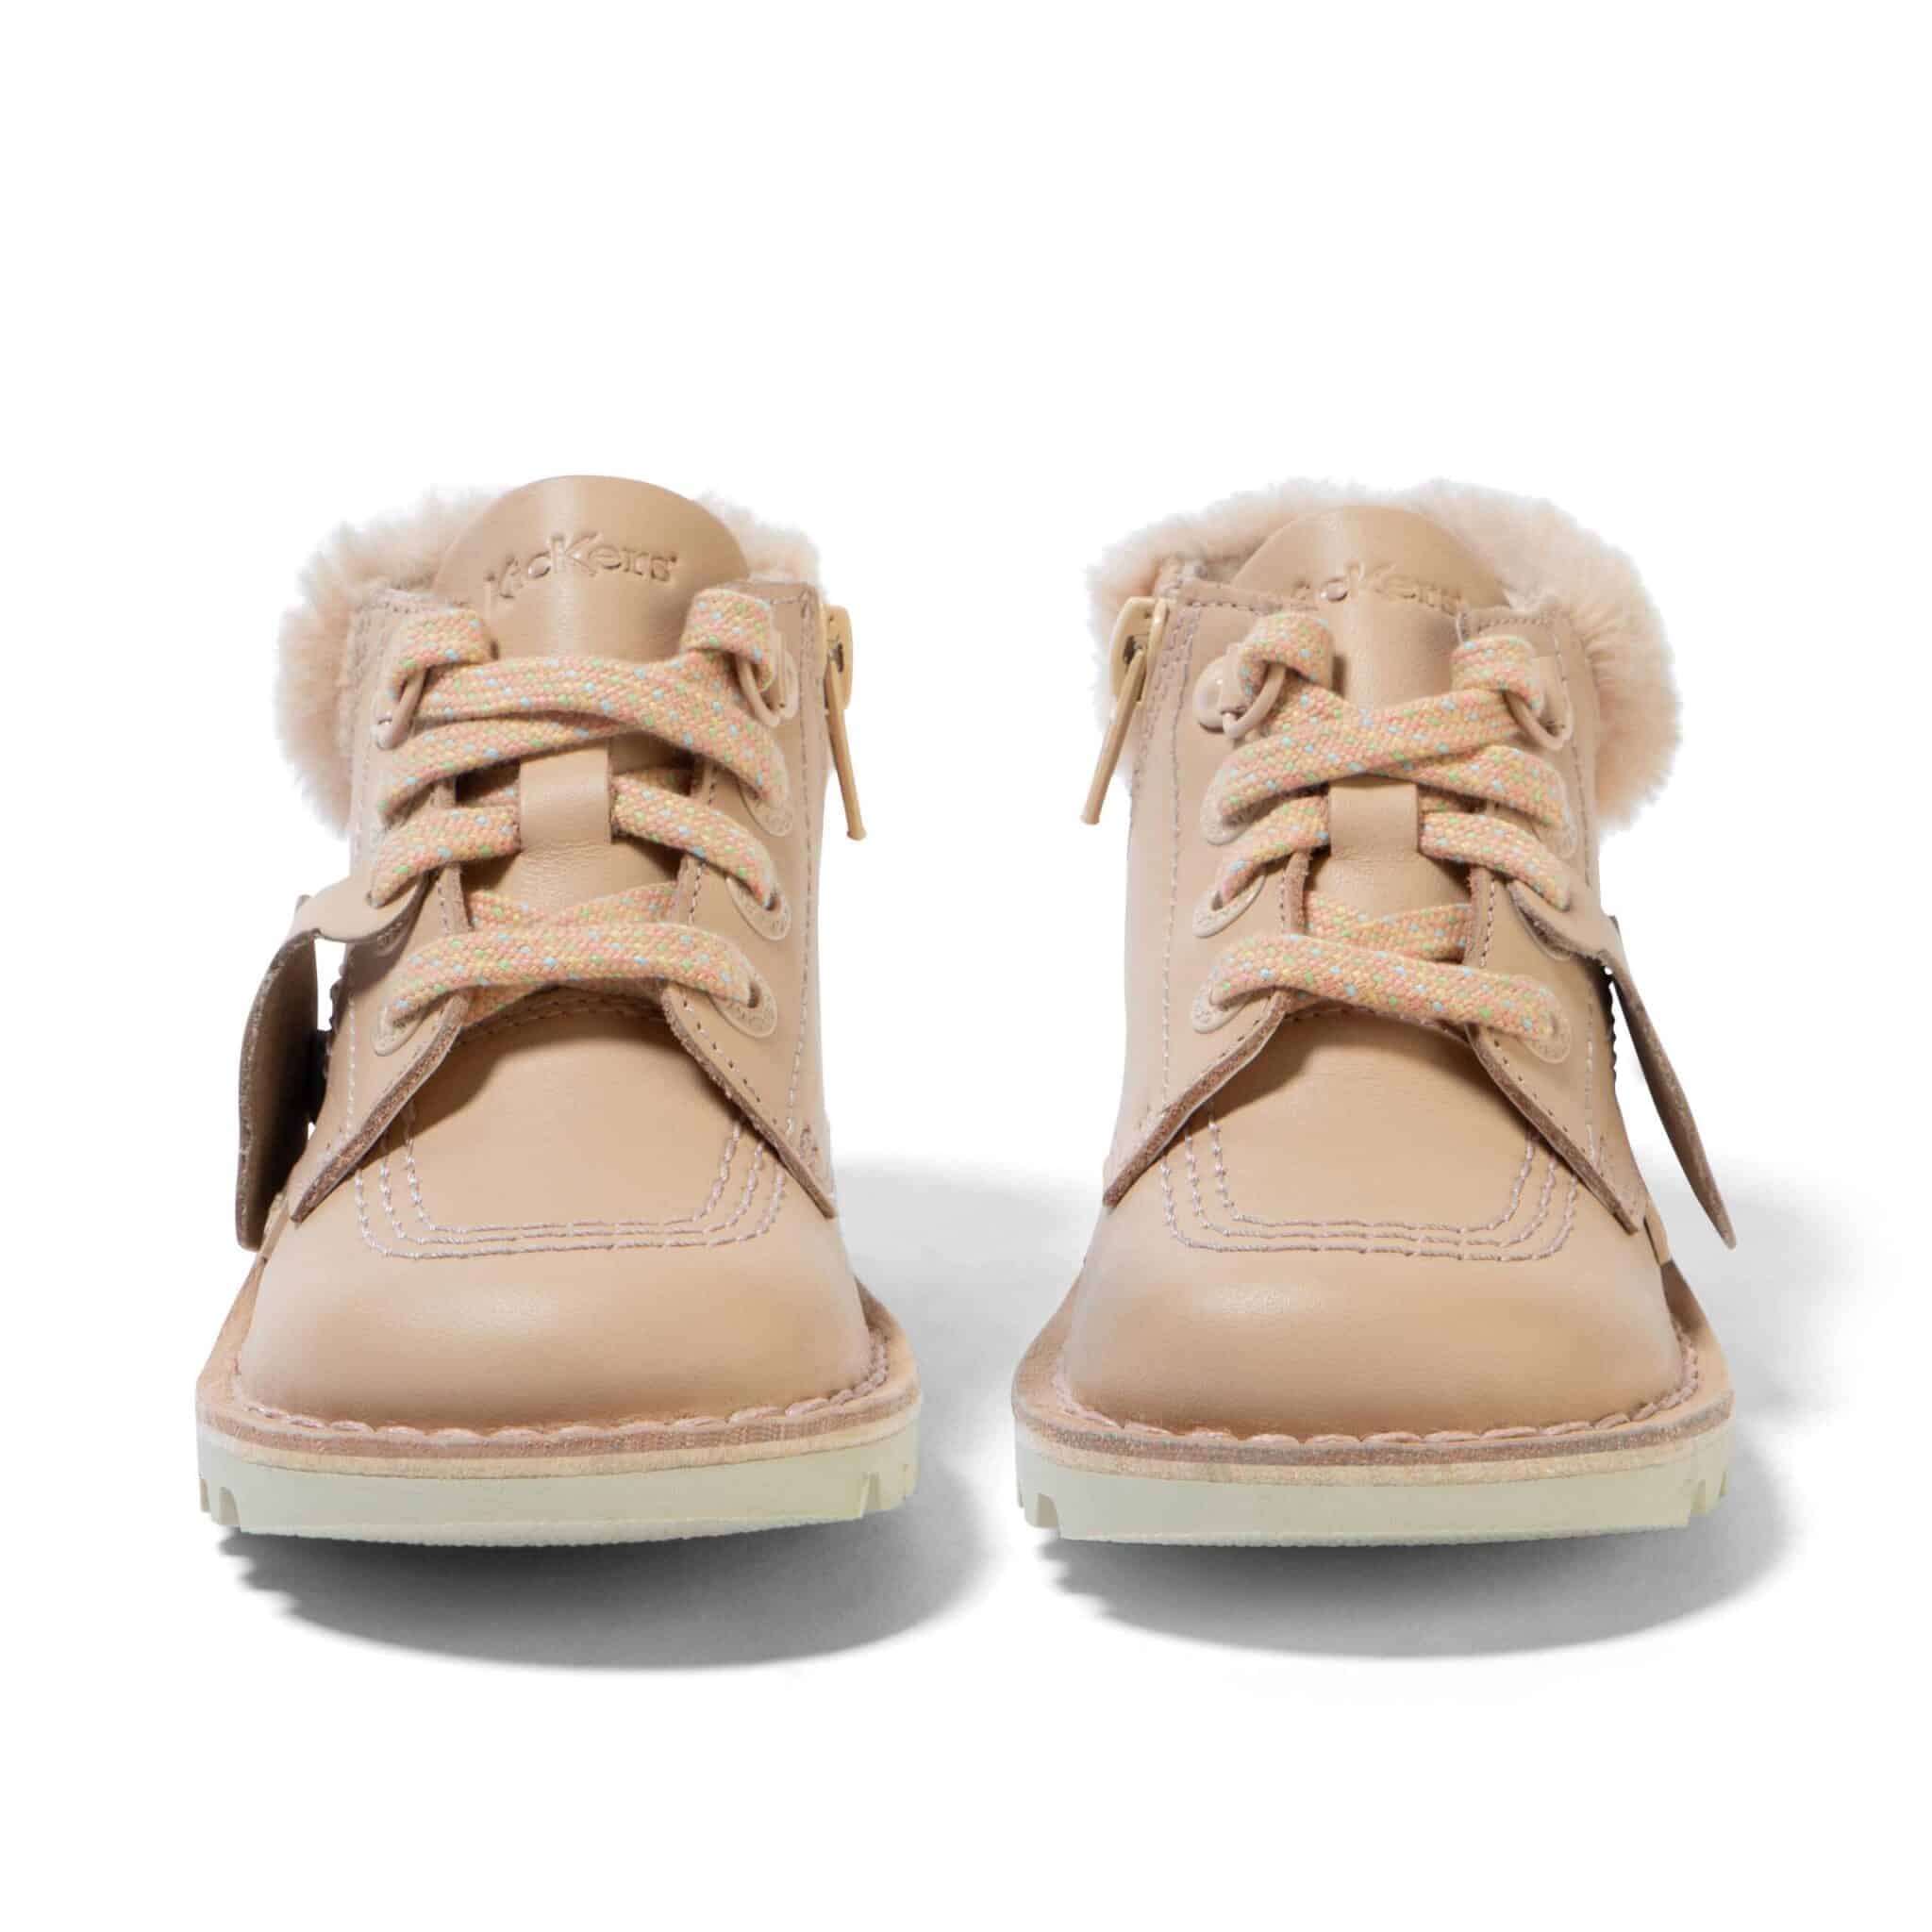 kickers tan leather high top boys warm boots front view